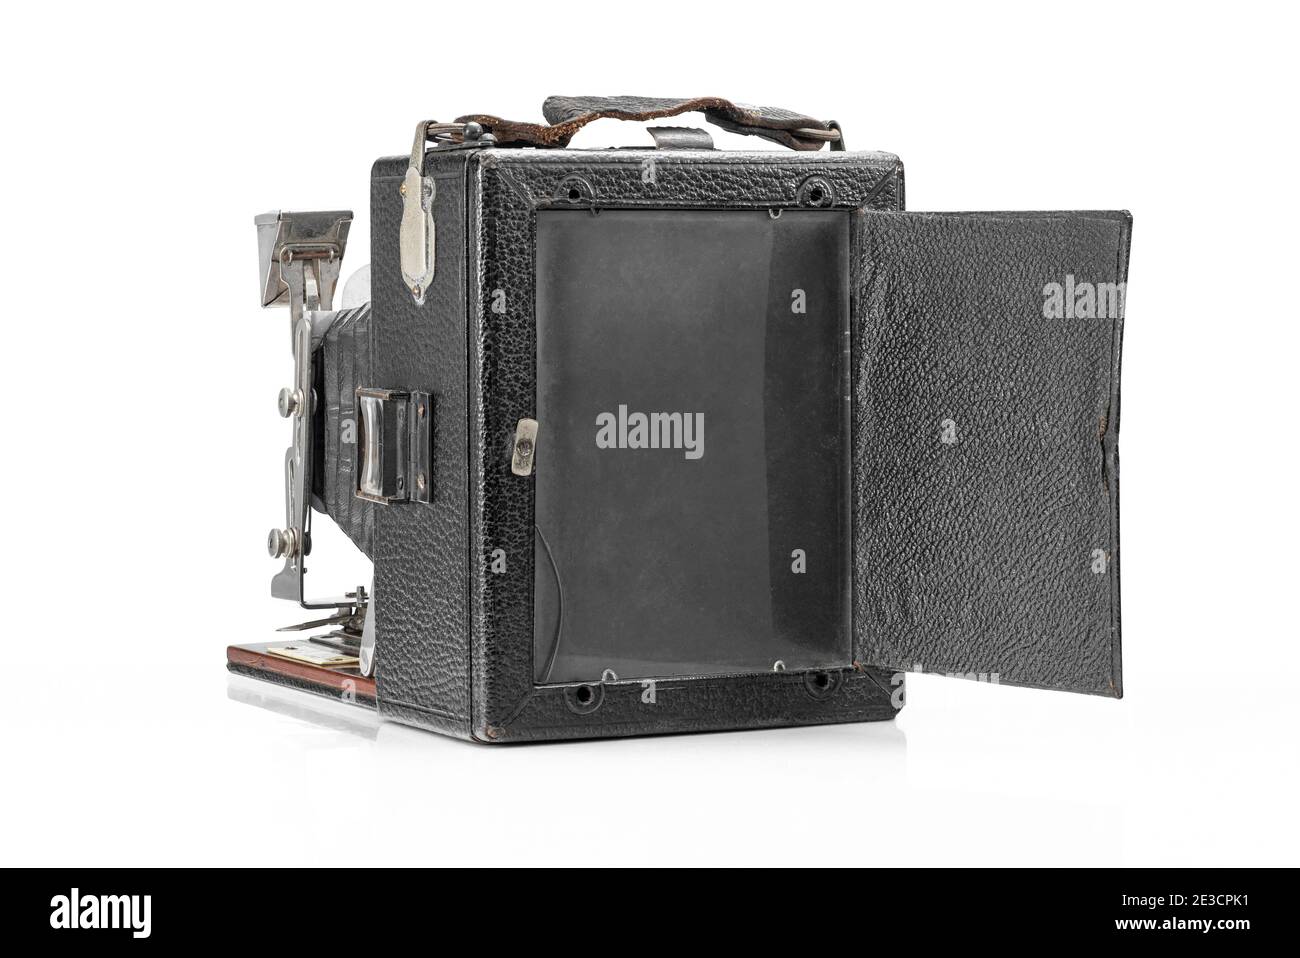 GROUND GLASS VIEWER FOCUSING SCREEN ENSIGN KLITO FOLDING PLATE CAMERA Houghton Ensign Klito Camera Double Extension Bellows Clipping Path in JPEG Stock Photo